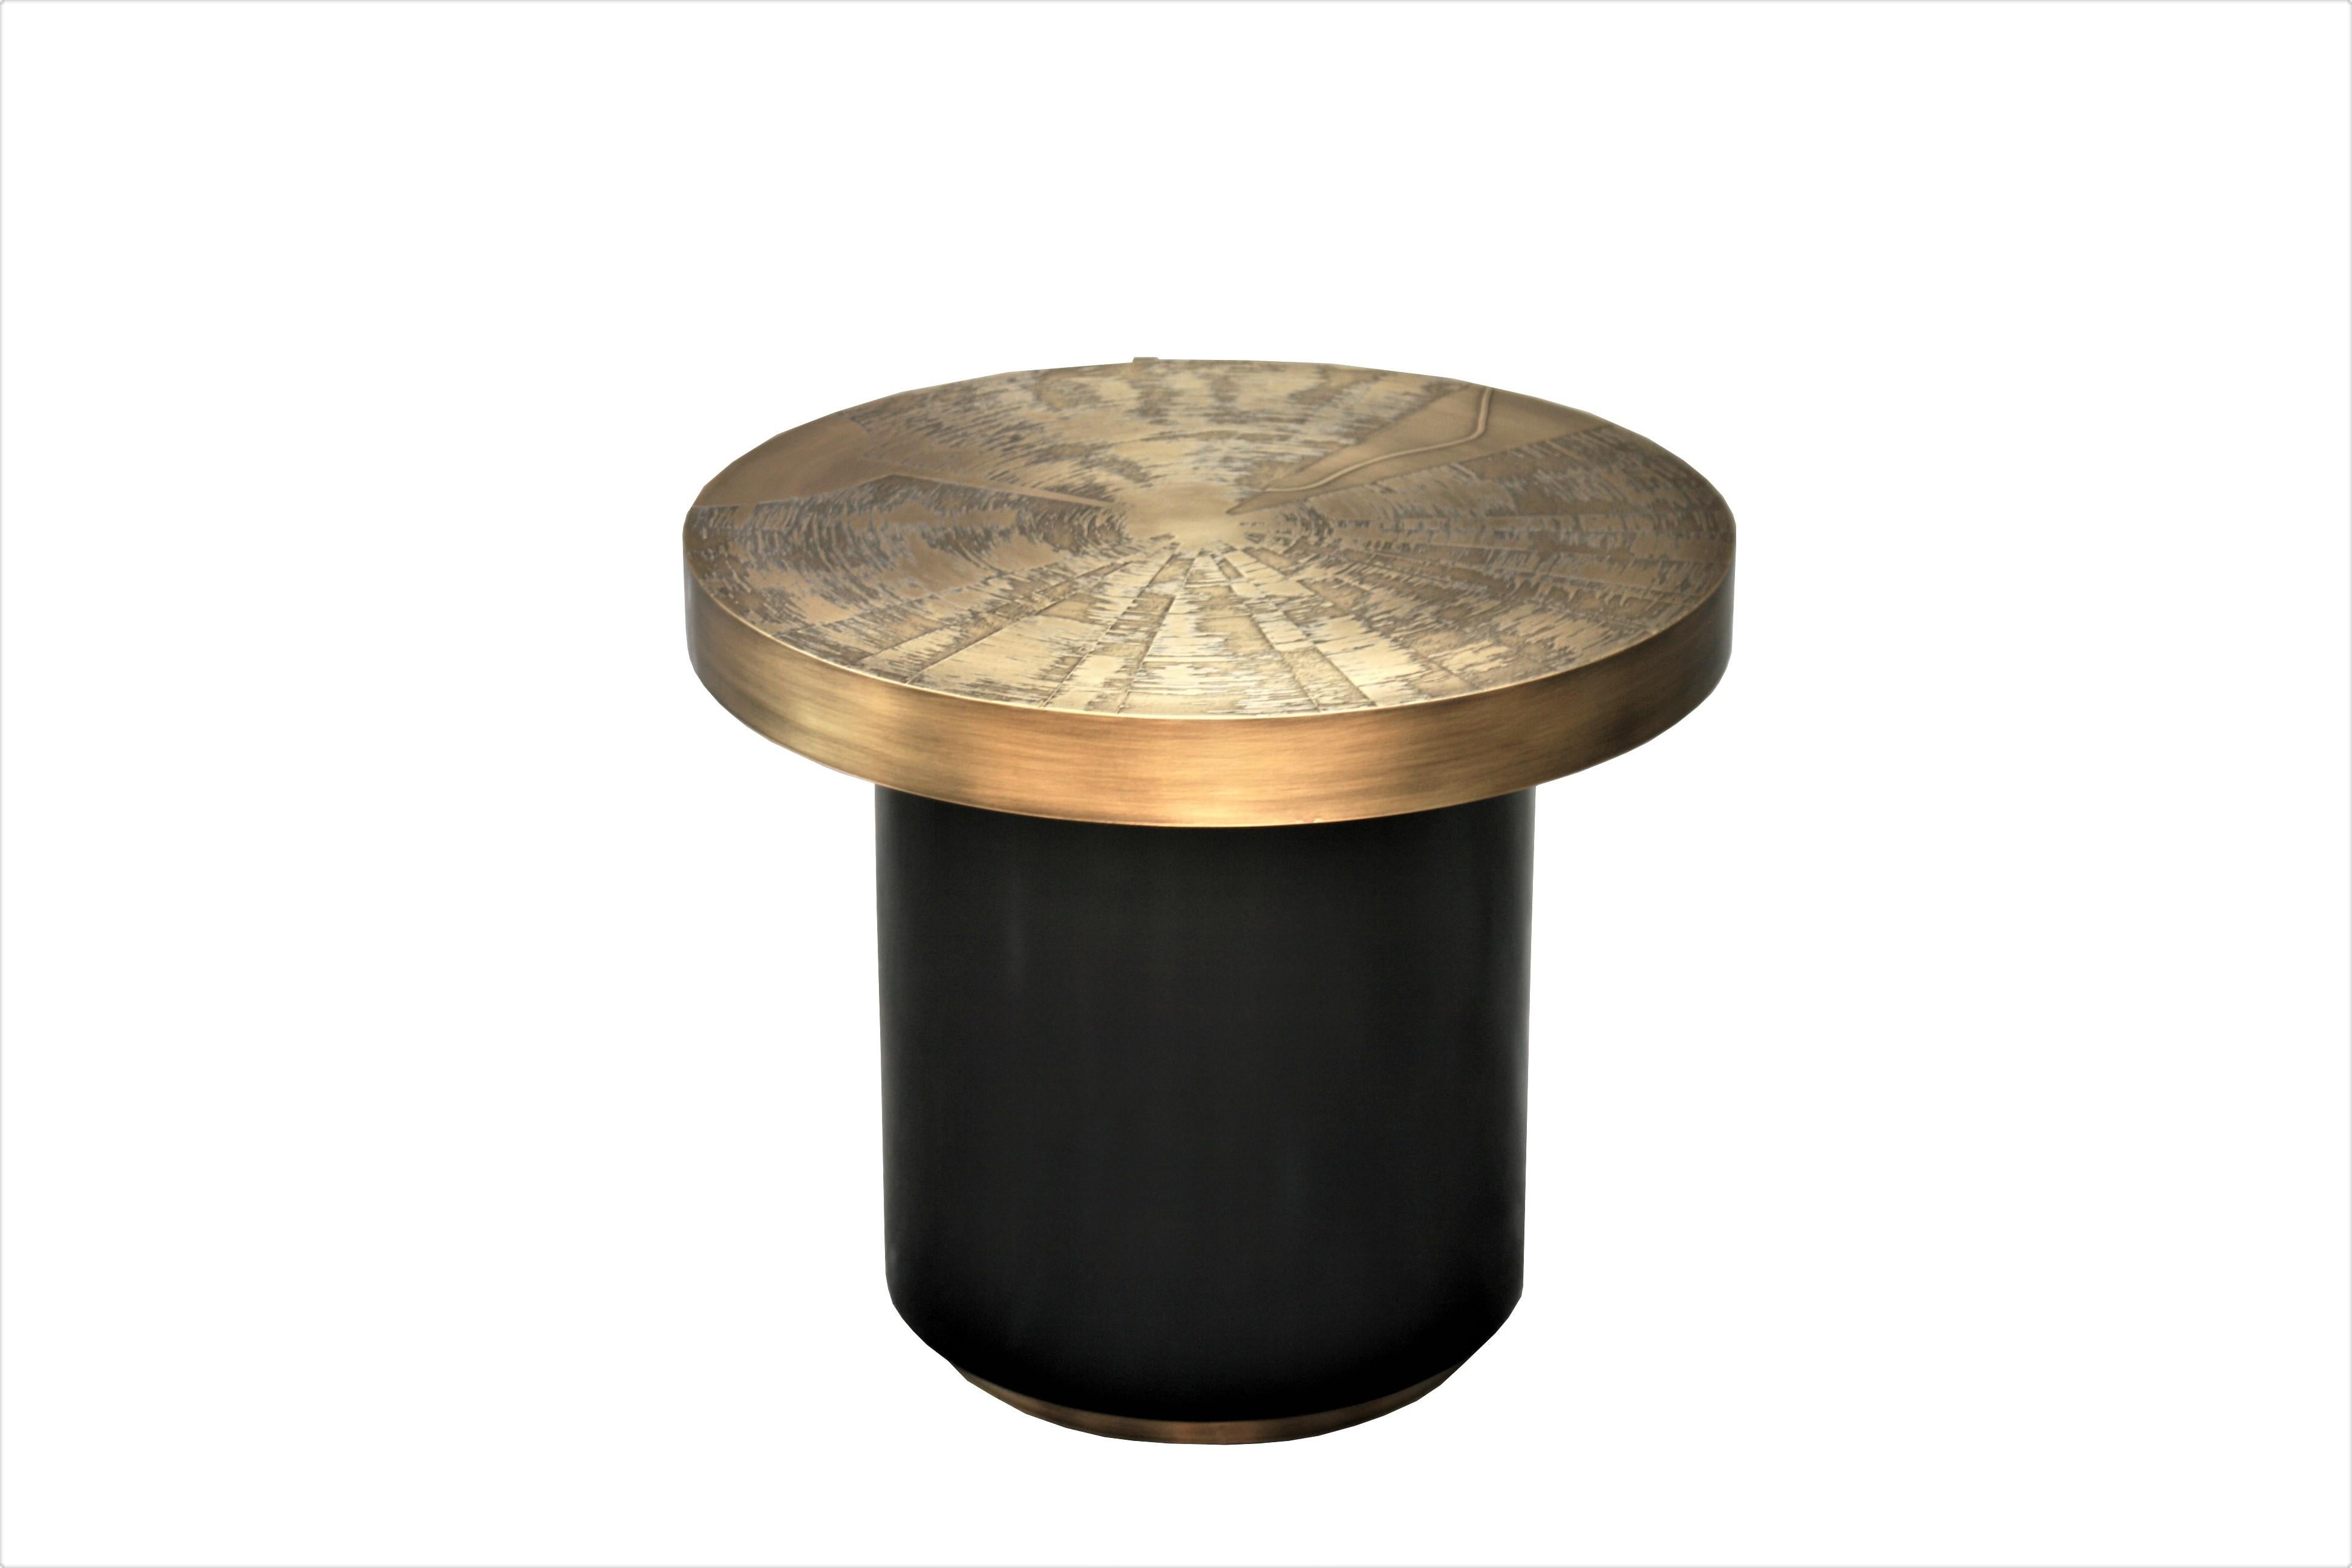 Belgali is a Belgian producer of brass handmade furniture. Mostly acid etched designs, finished with high quality rare semi precious gems. 

Small round coffee table by Belgali acid etched brass has been acid etched and patinated black. Custom